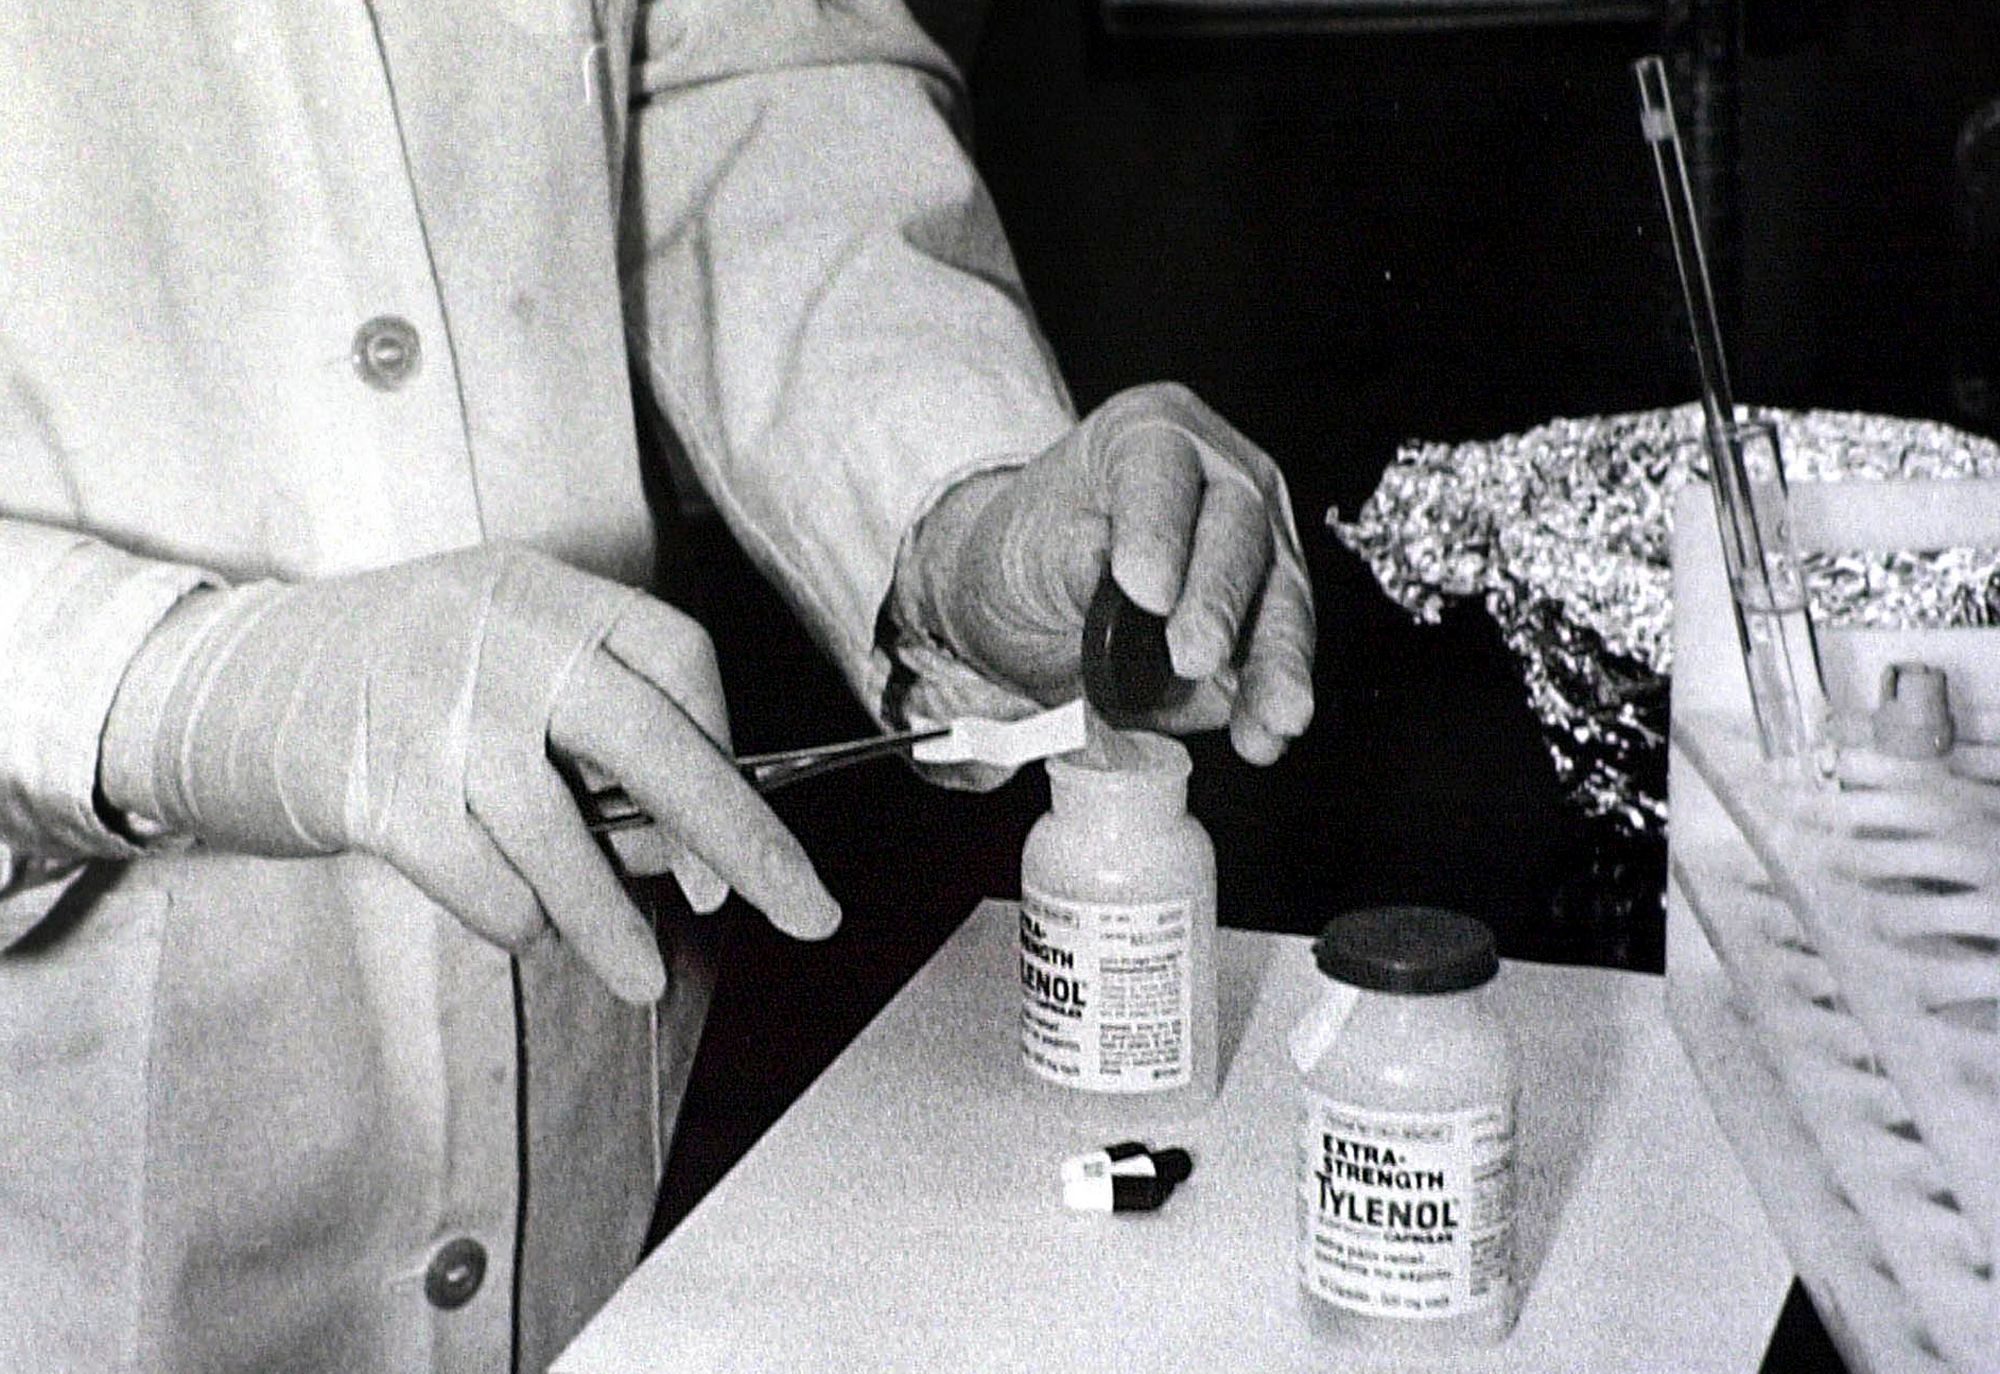 Bottles of Extra-Strength Tylenol are tested with a chemically treated paper that turns blue in the presence of cyanide at the Illinois Department of Health in Chicago. Arlington Heights, Ill., police say they'll take over the still-unsolved investigation into the deaths of seven people who took cyanide-laced Tylenol more than three decades ago. Local agencies will work together after the FBI decided to no longer lead the investigation into the 1982 Chicago area poisonings. The poisoned Tylenol was consumed over three days in Chicago and four suburbs, triggering a national scare and a huge recall Tylenol Poisonings, Chicago, USA